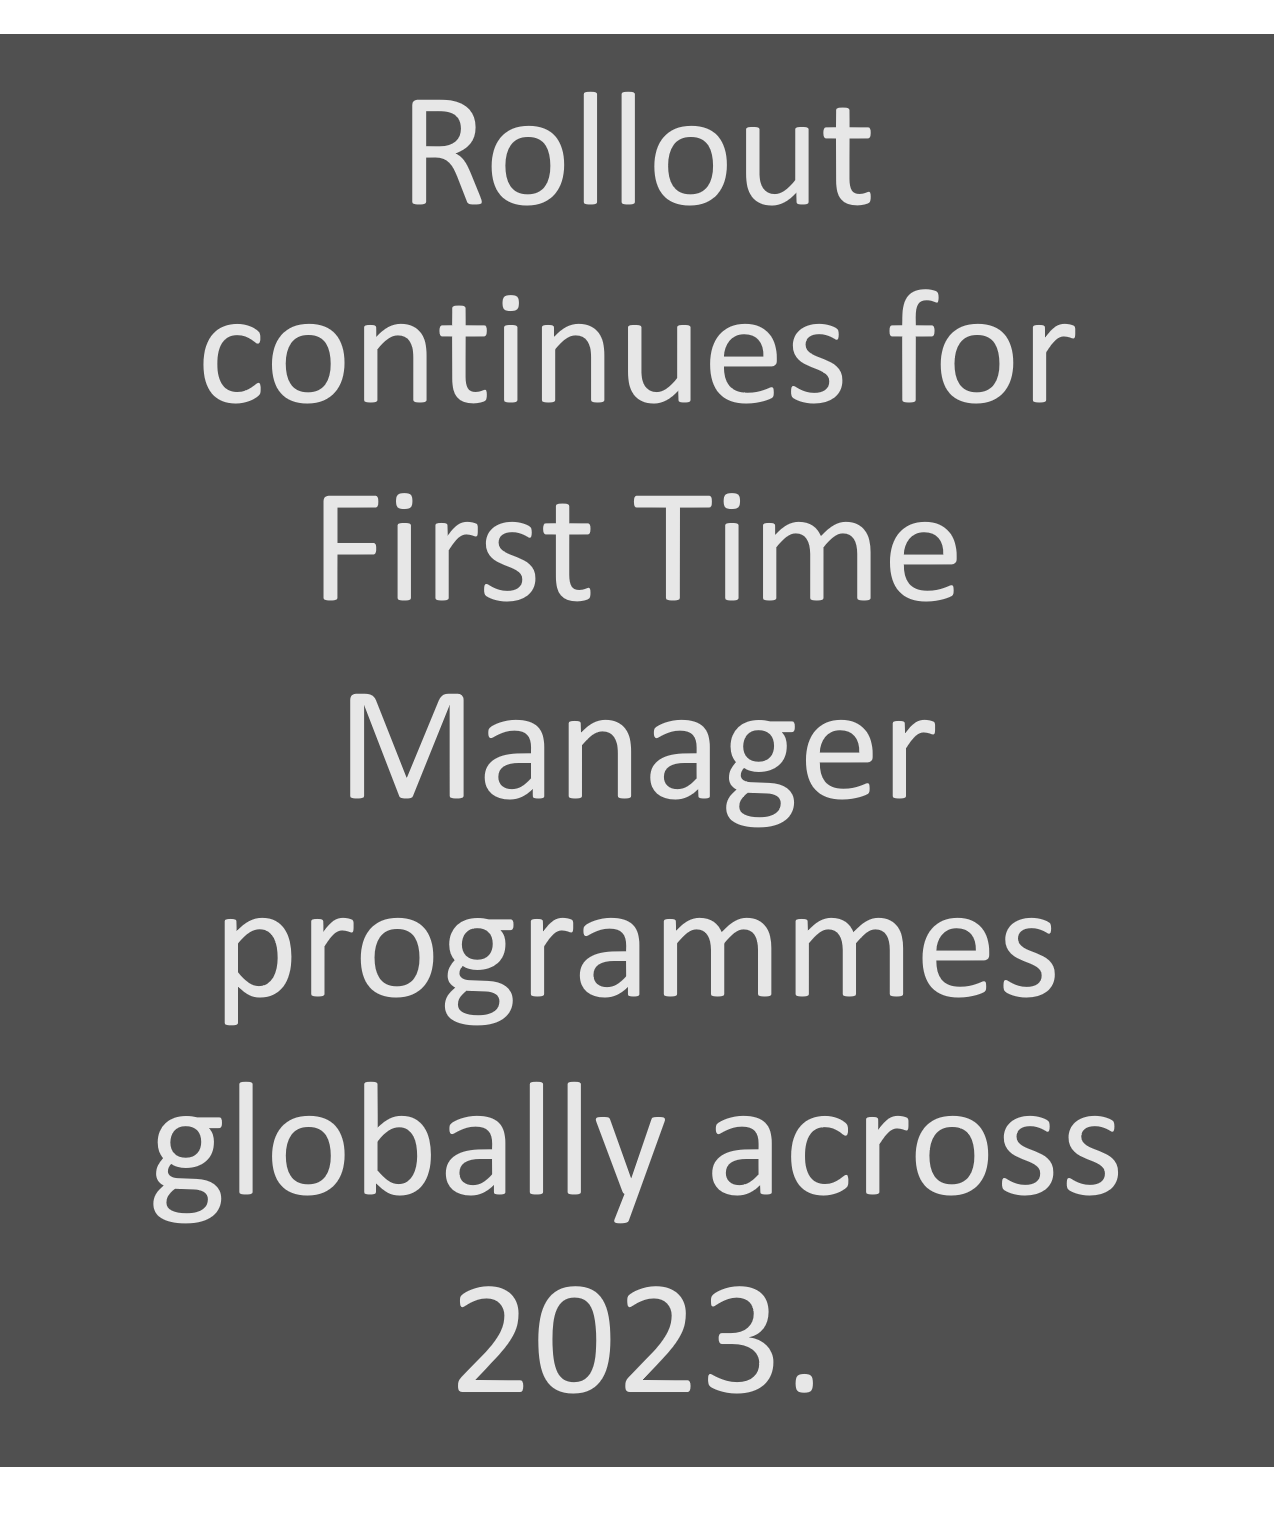 Text reads: Rollout continues for First Time Manager programmes globally across 2023.